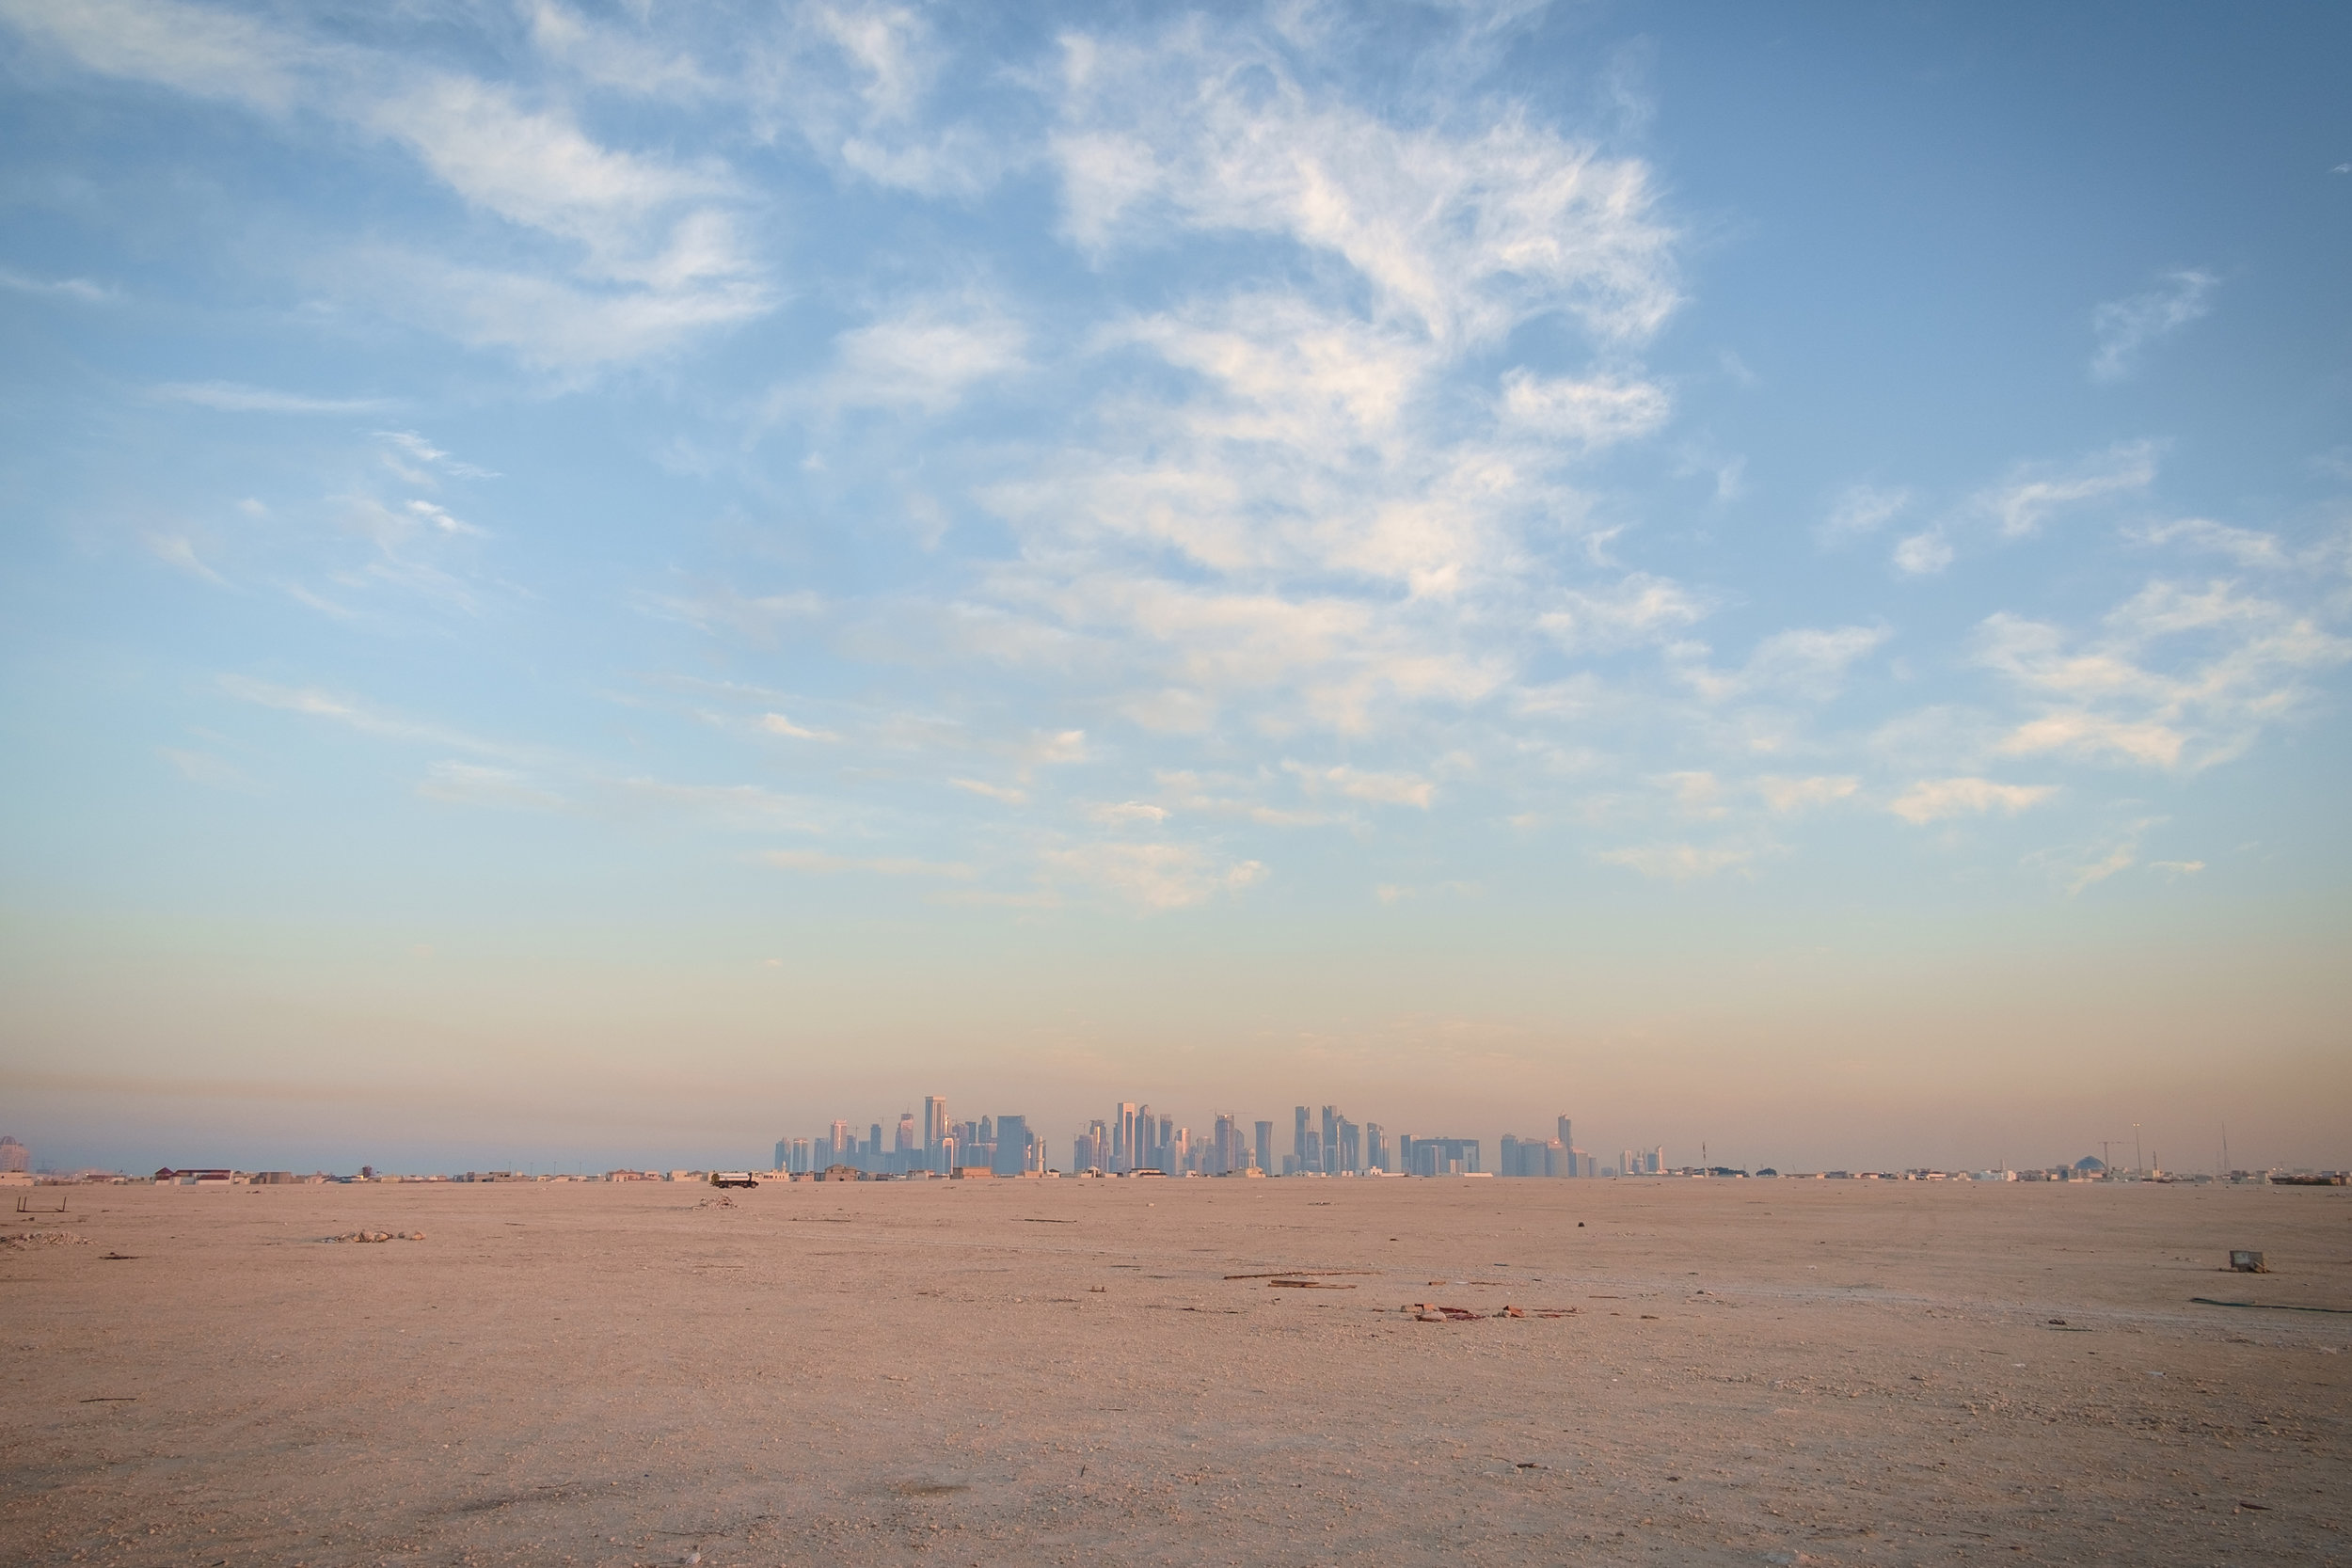  West Bay, Doha’s business district and iconic skyline, is seen in the distance. 